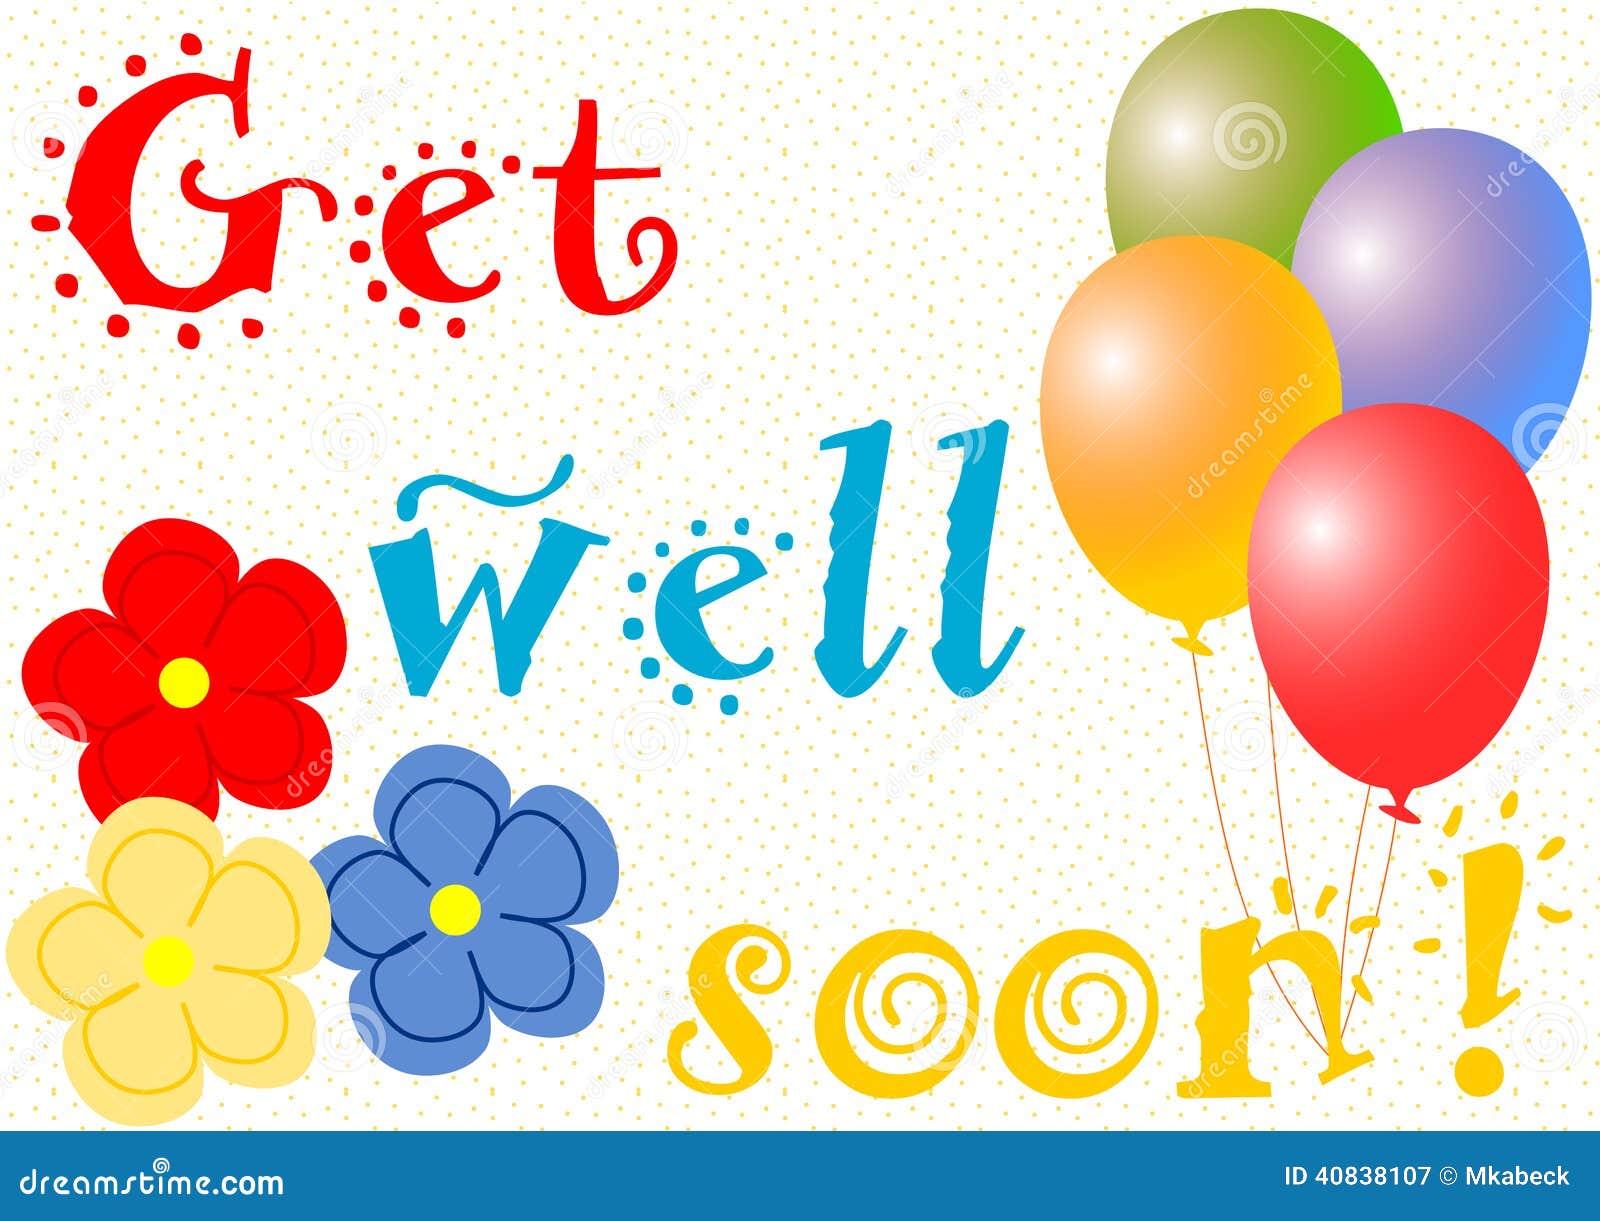 clip art get well pictures - photo #41